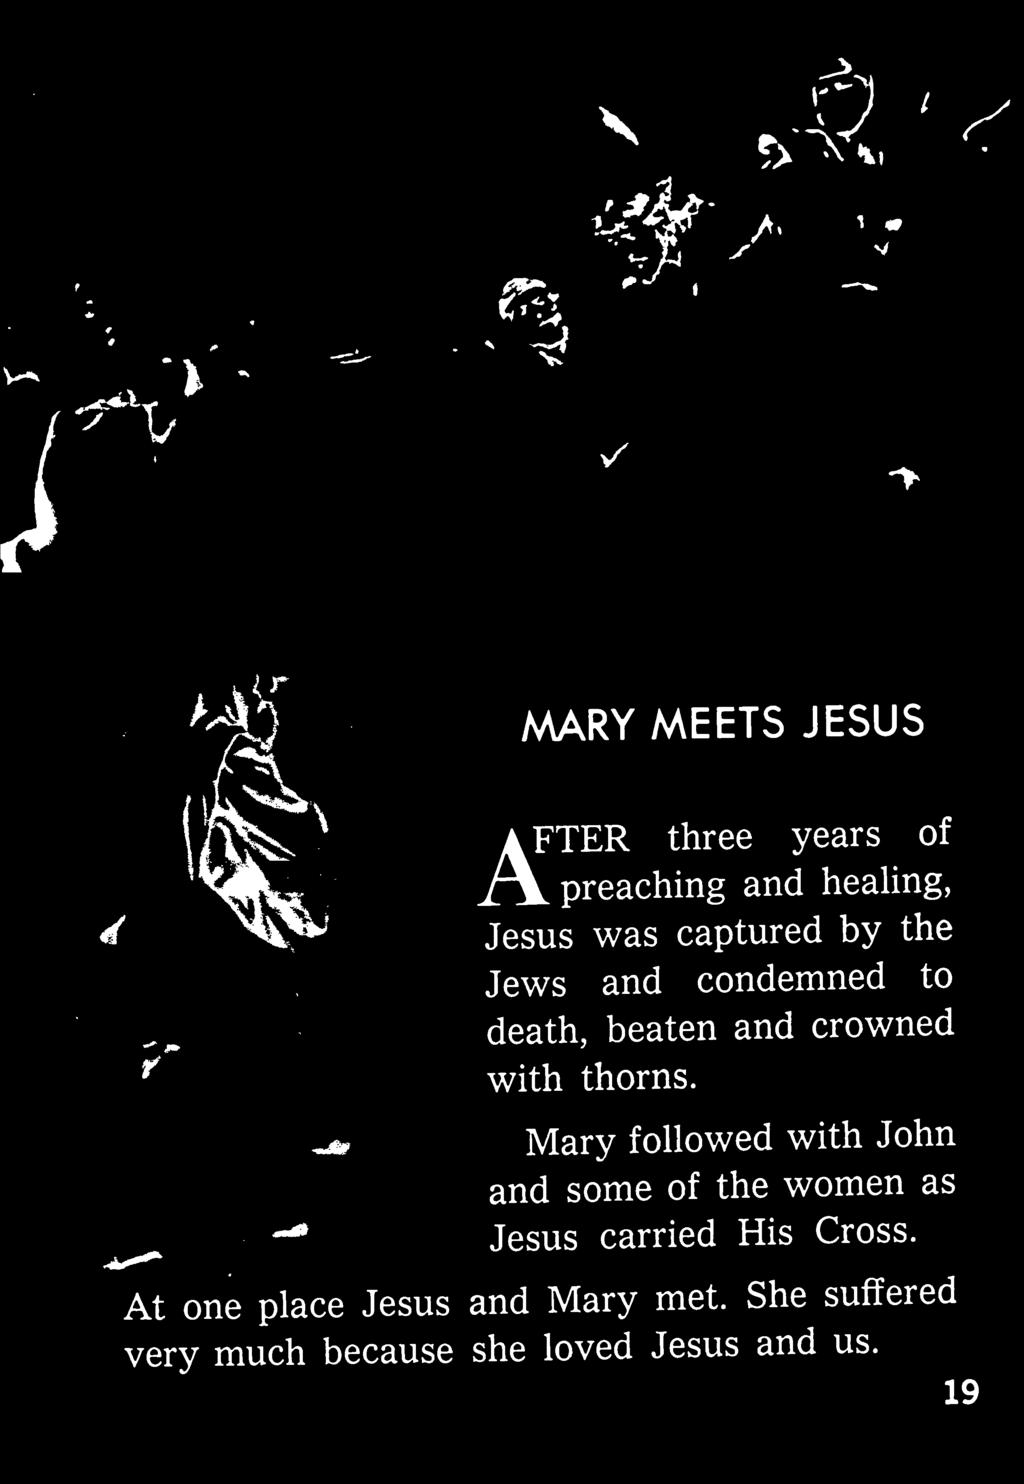 Mary followed with John and some of the women as Jesus